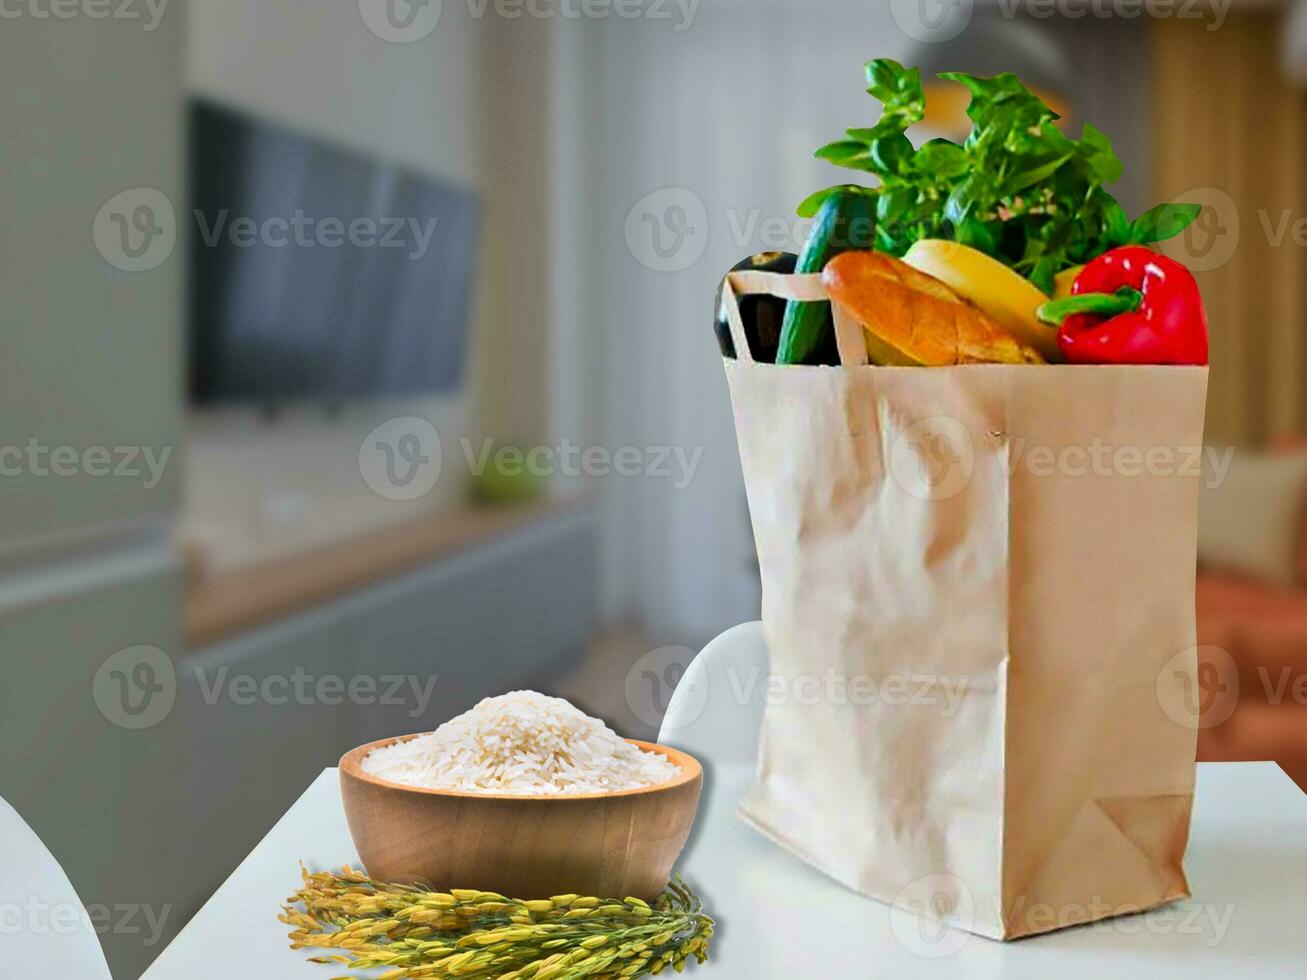 White rice Cereal and sos paper bag full with vegetables photo